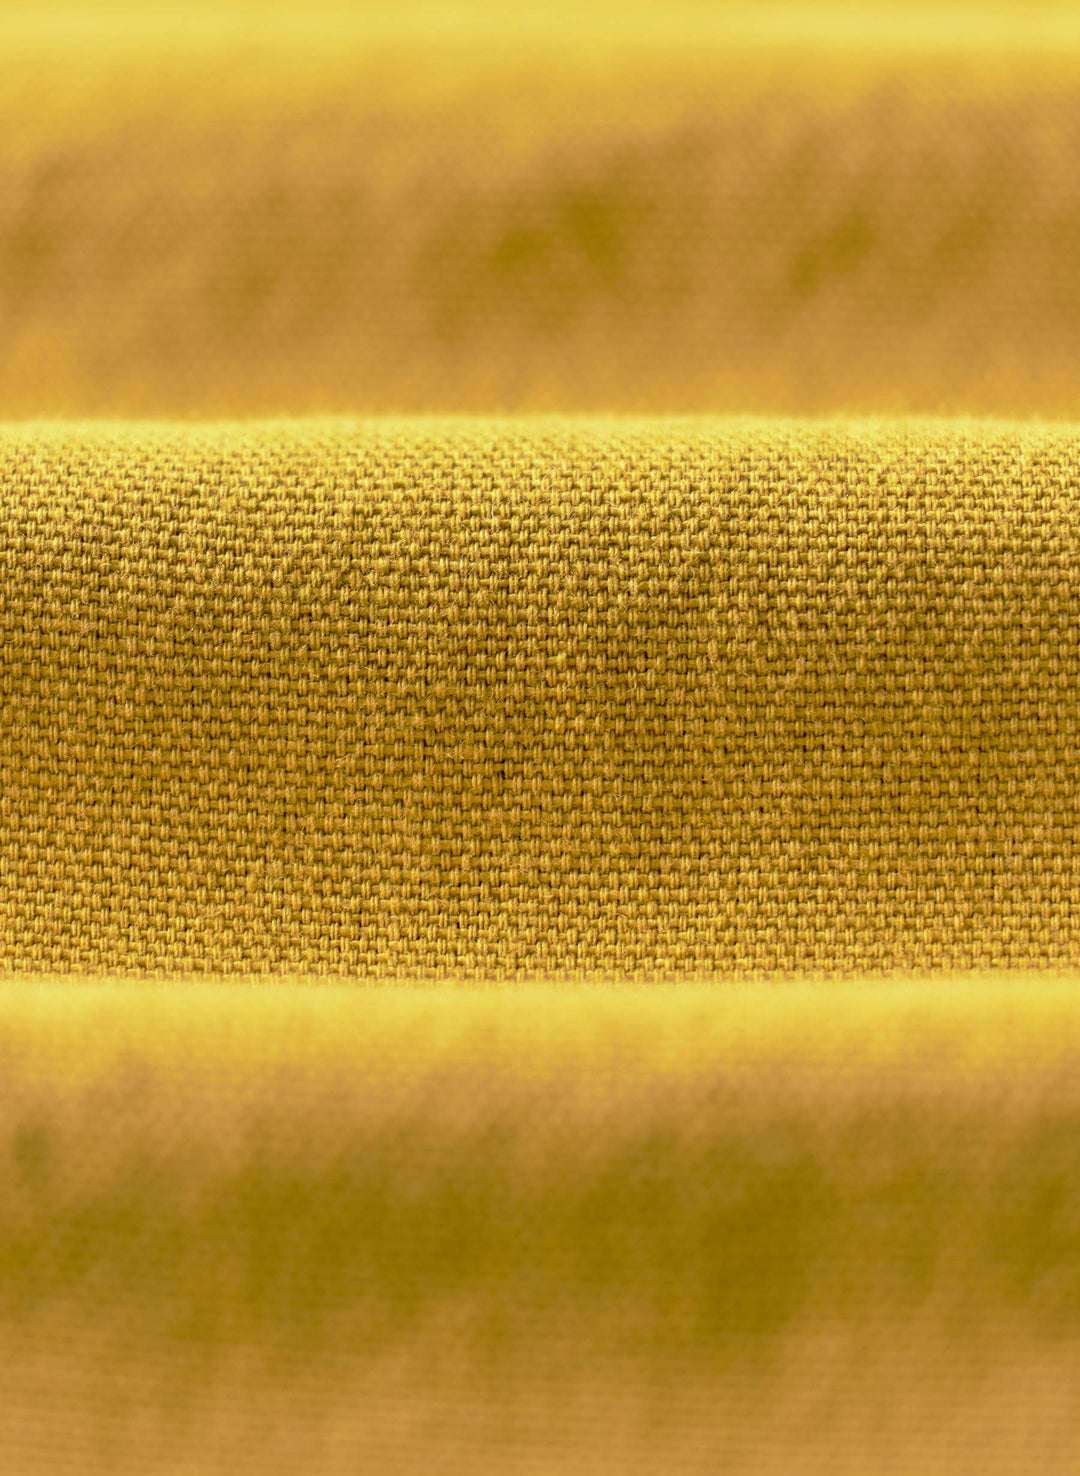 a close up of a yellow fabric